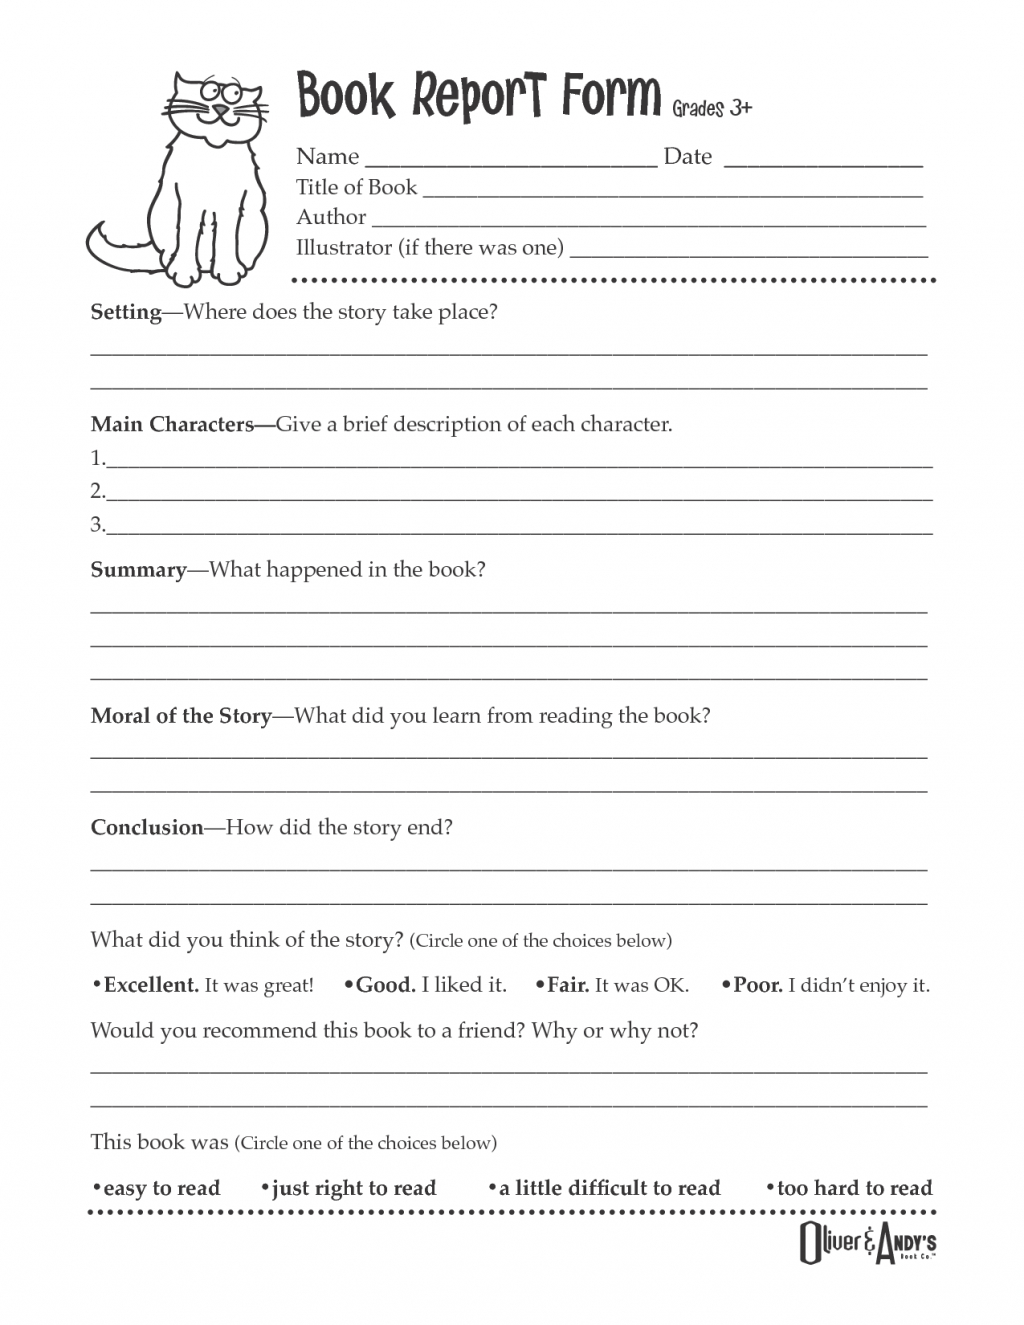 Free Research Paper Grader 1St Grade Writing | Ceolpub With Regard To 1St Grade Book Report Template